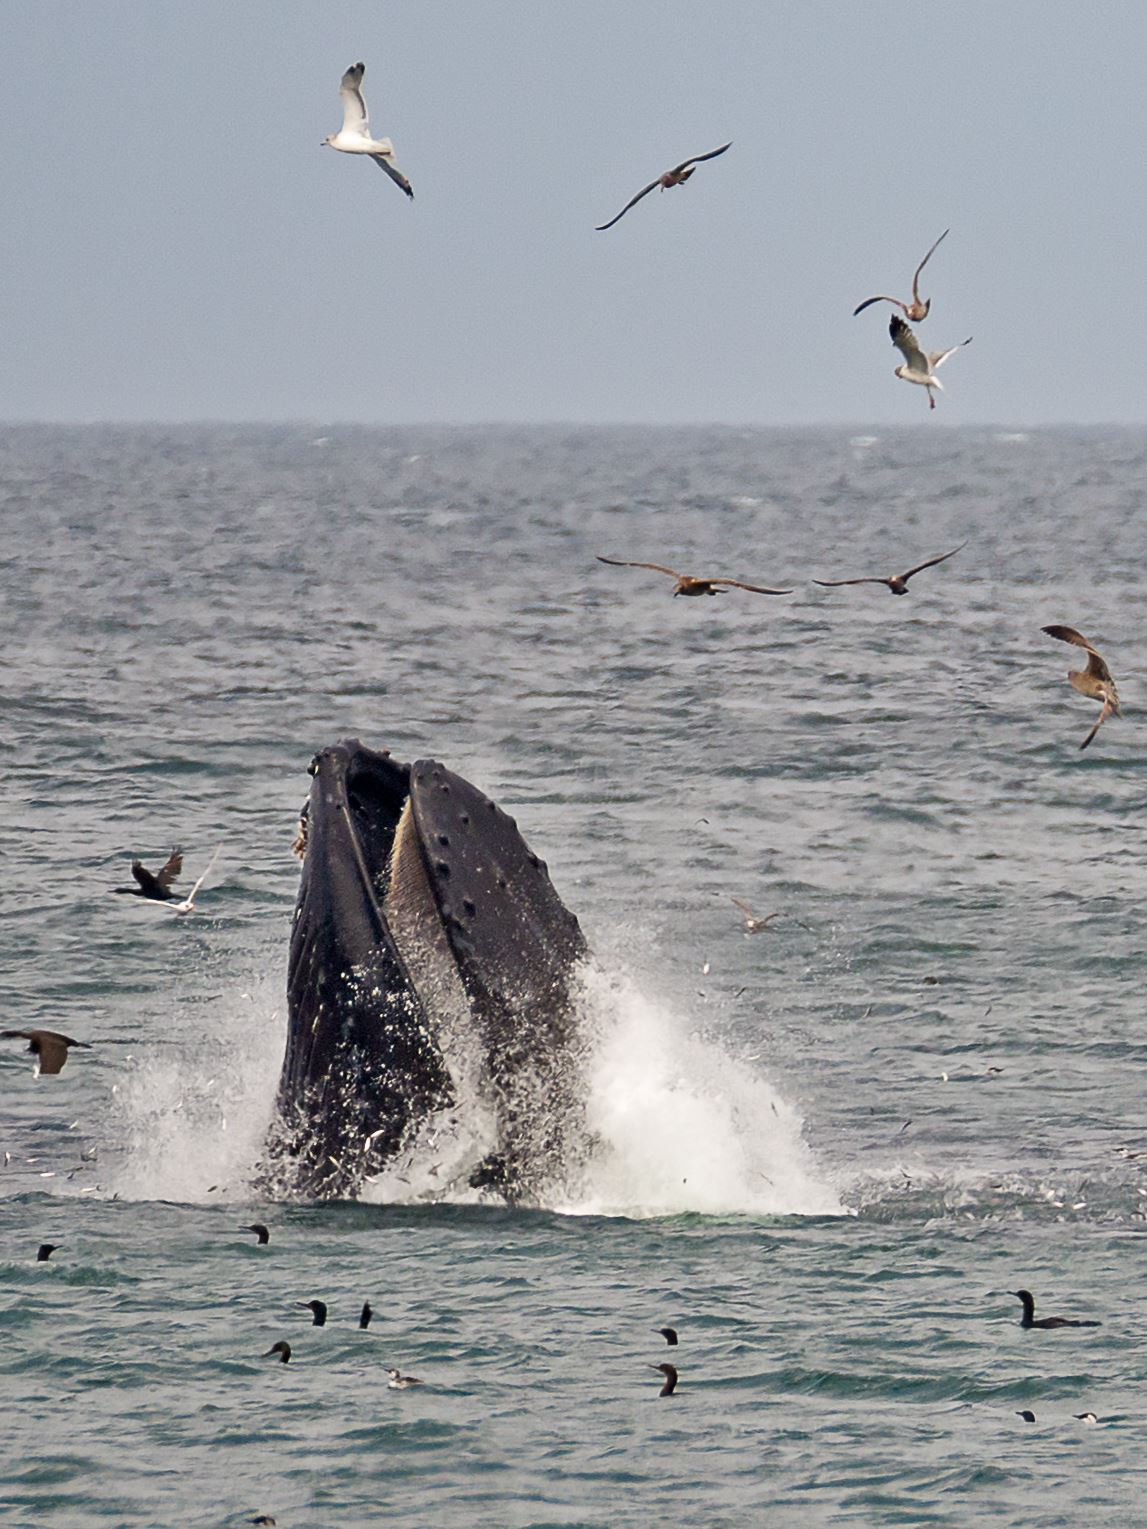 Gulp! - Humpback whale lunge feeding while seabirds fly overhead by Denise Buckley Crawford